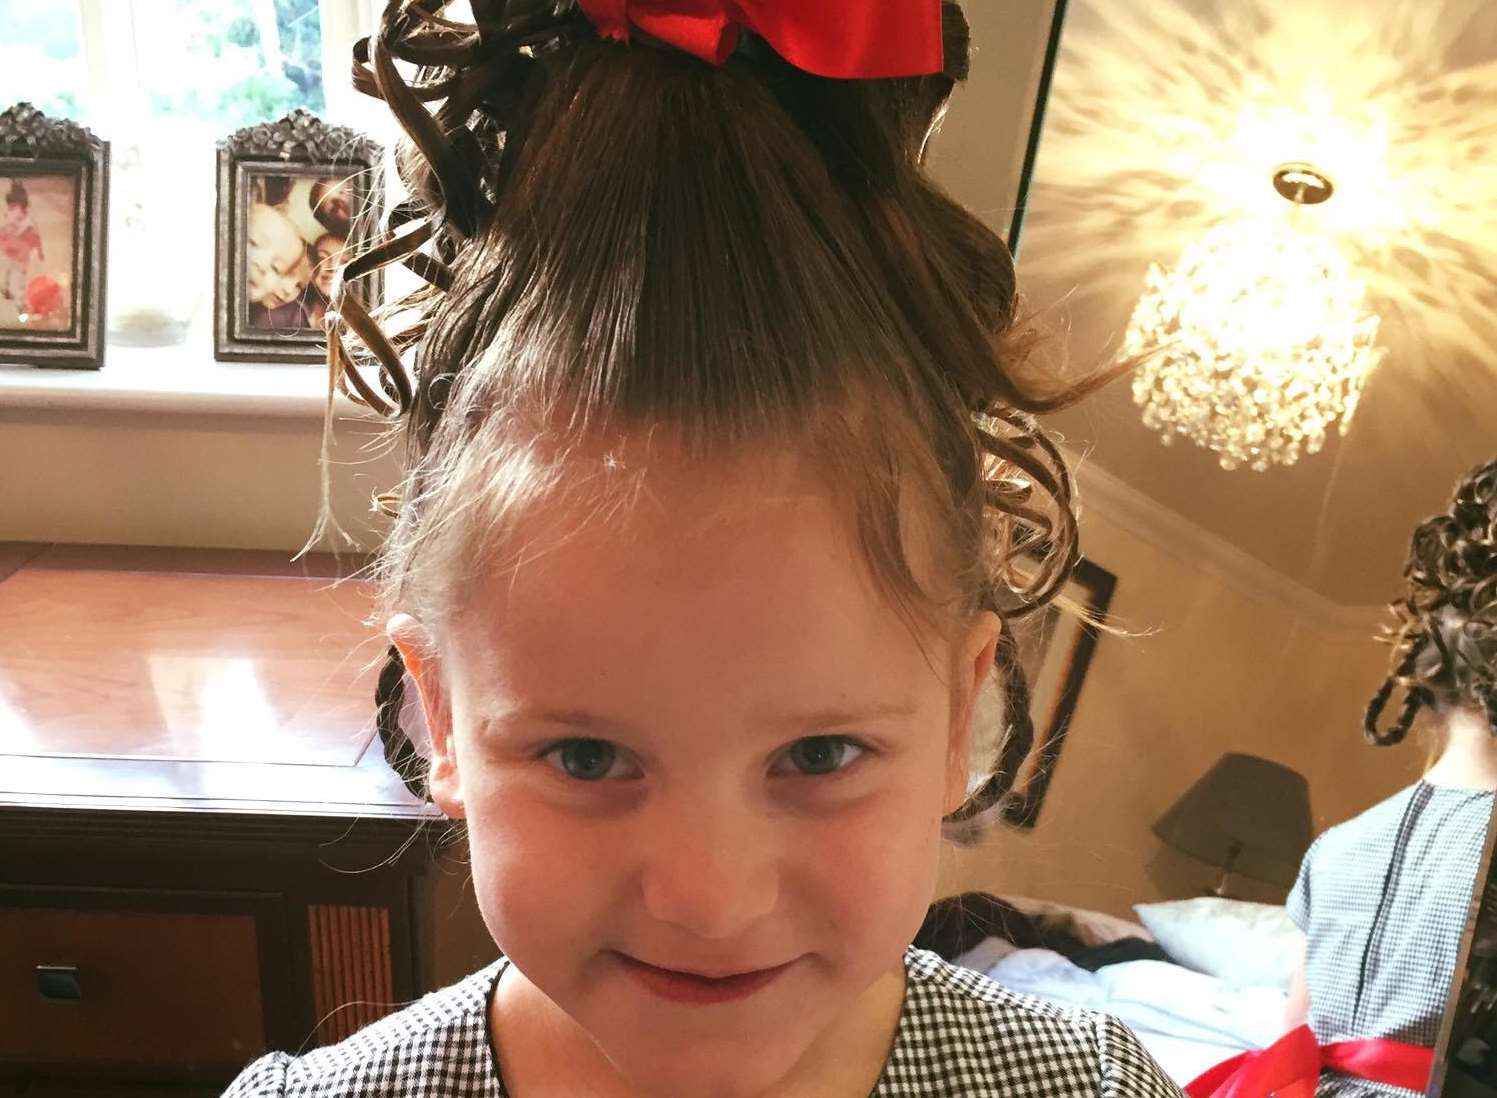 Charlotte aged 6, dressed as Cindy Lou Who from 'How the Grinch stole Christmas'